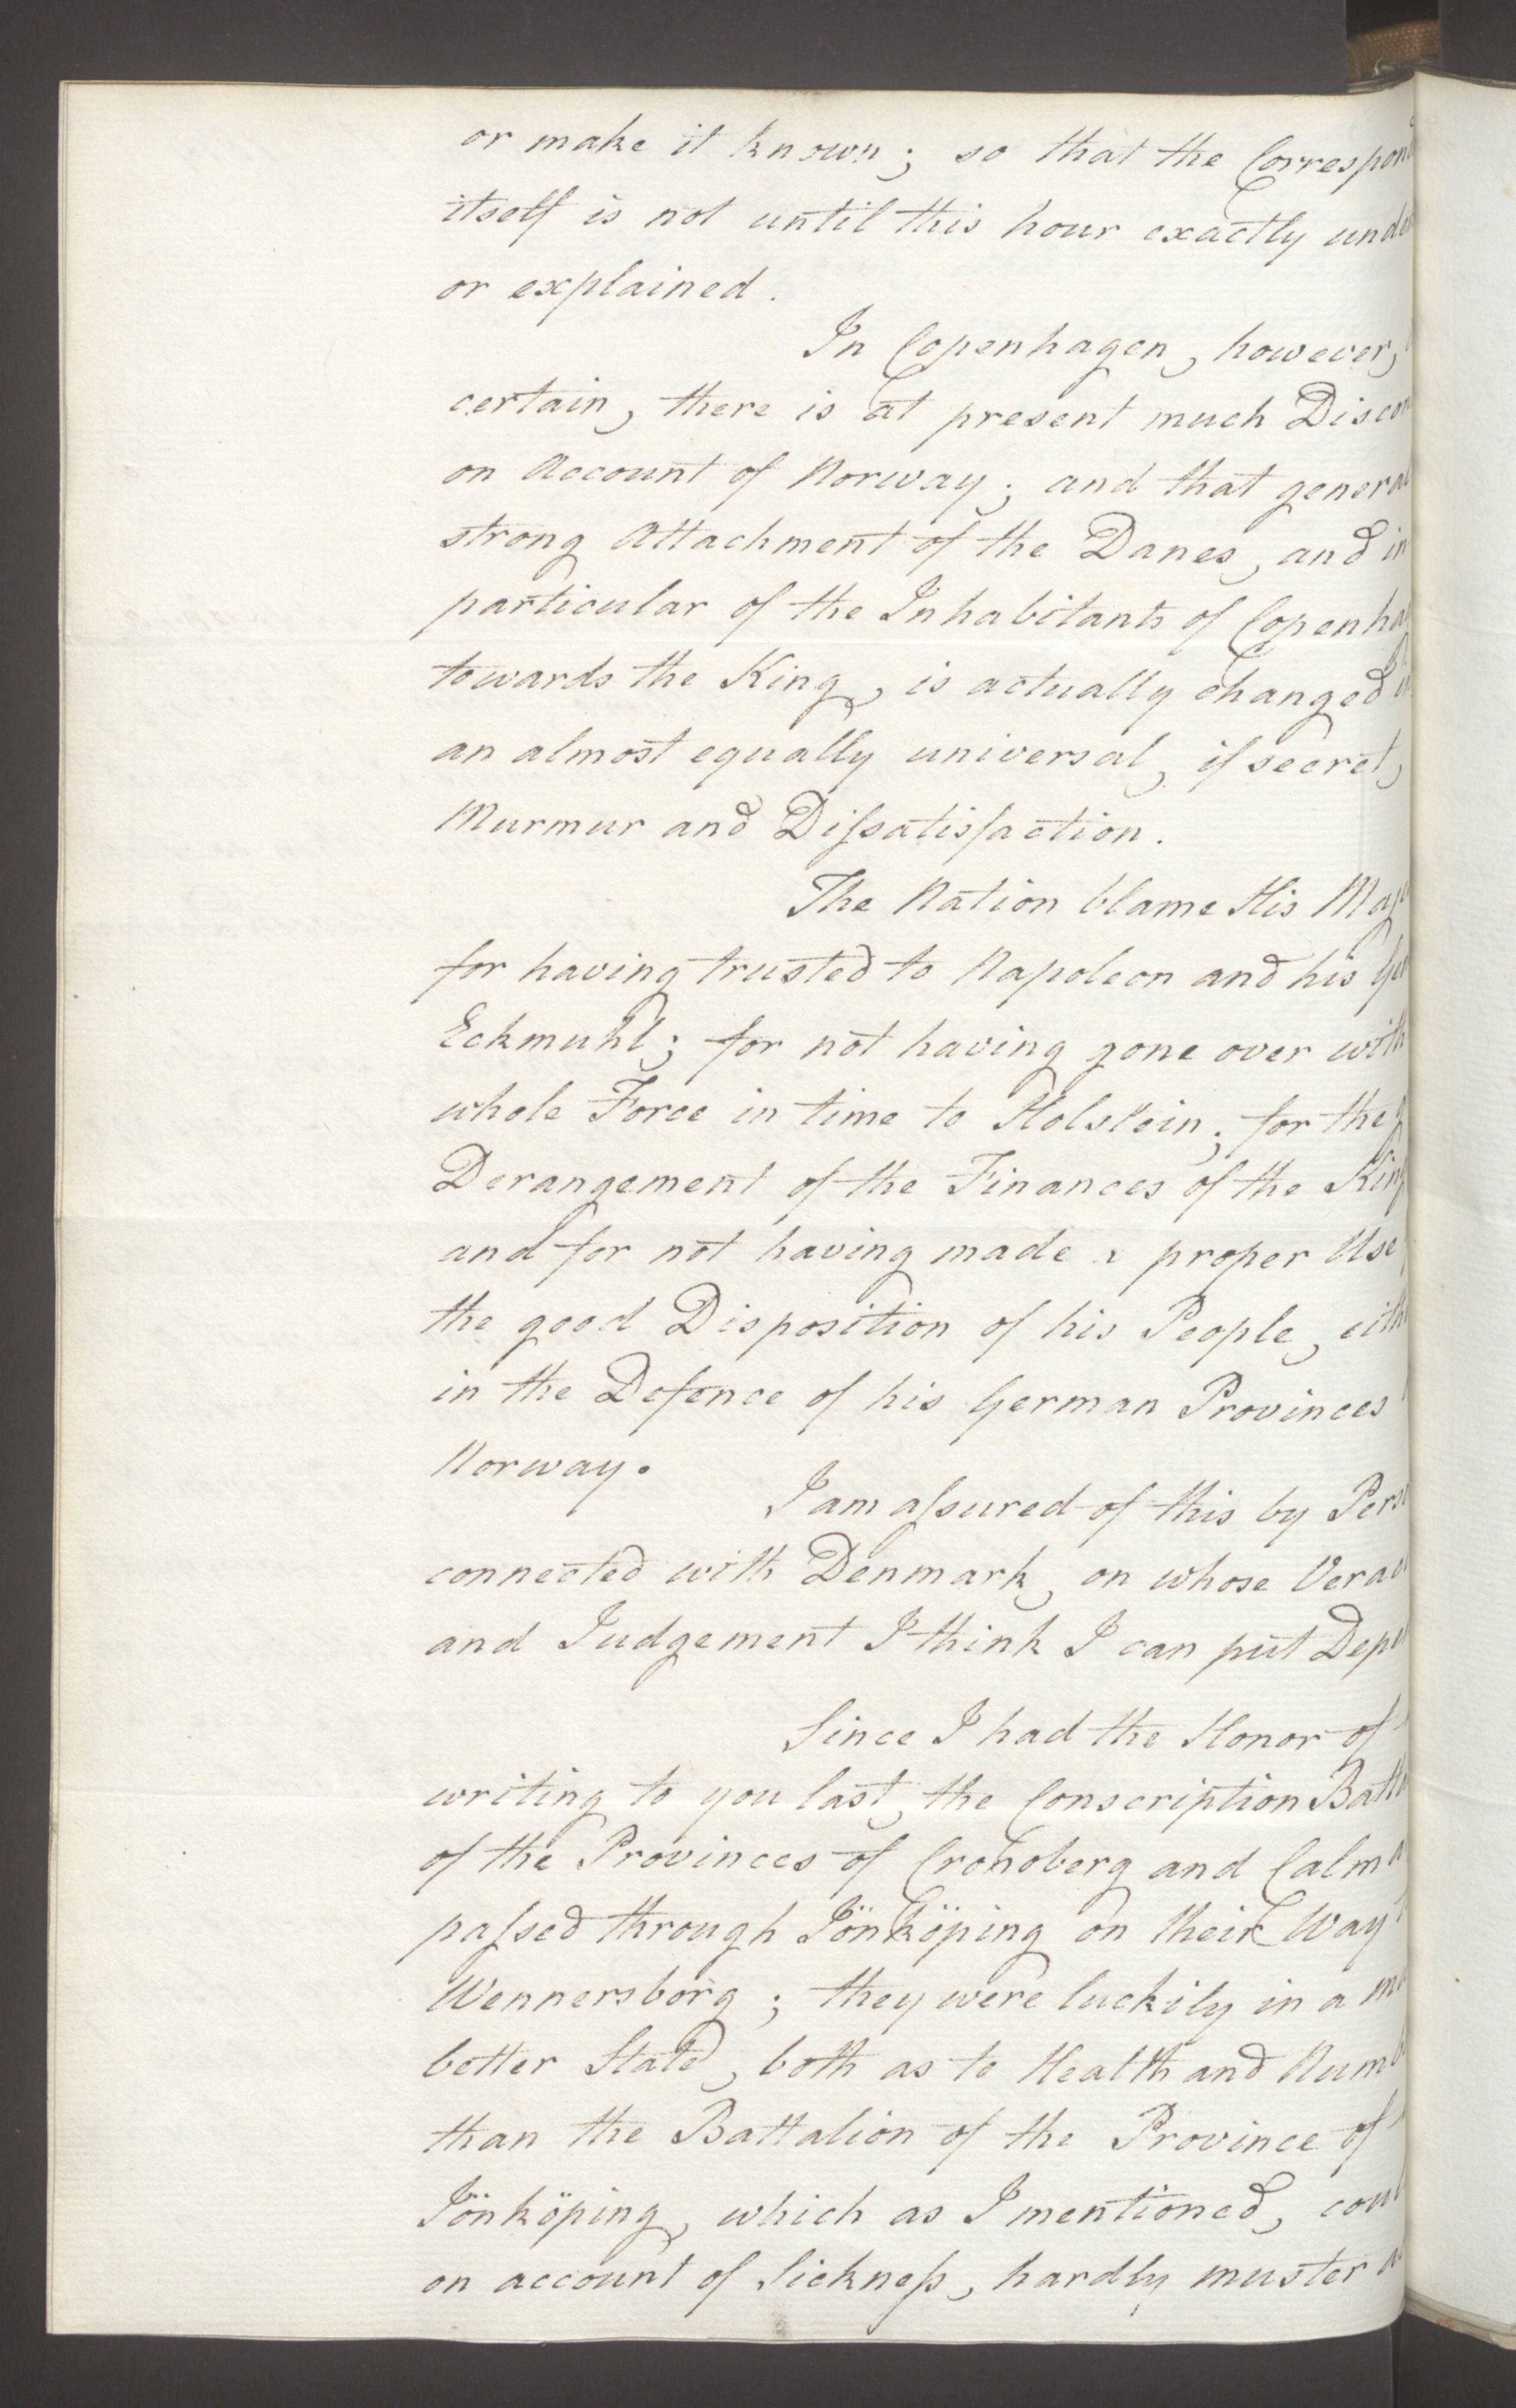 Foreign Office*, UKA/-/FO 38/16: Sir C. Gordon. Reports from Malmö, Jonkoping, and Helsingborg, 1814, s. 58